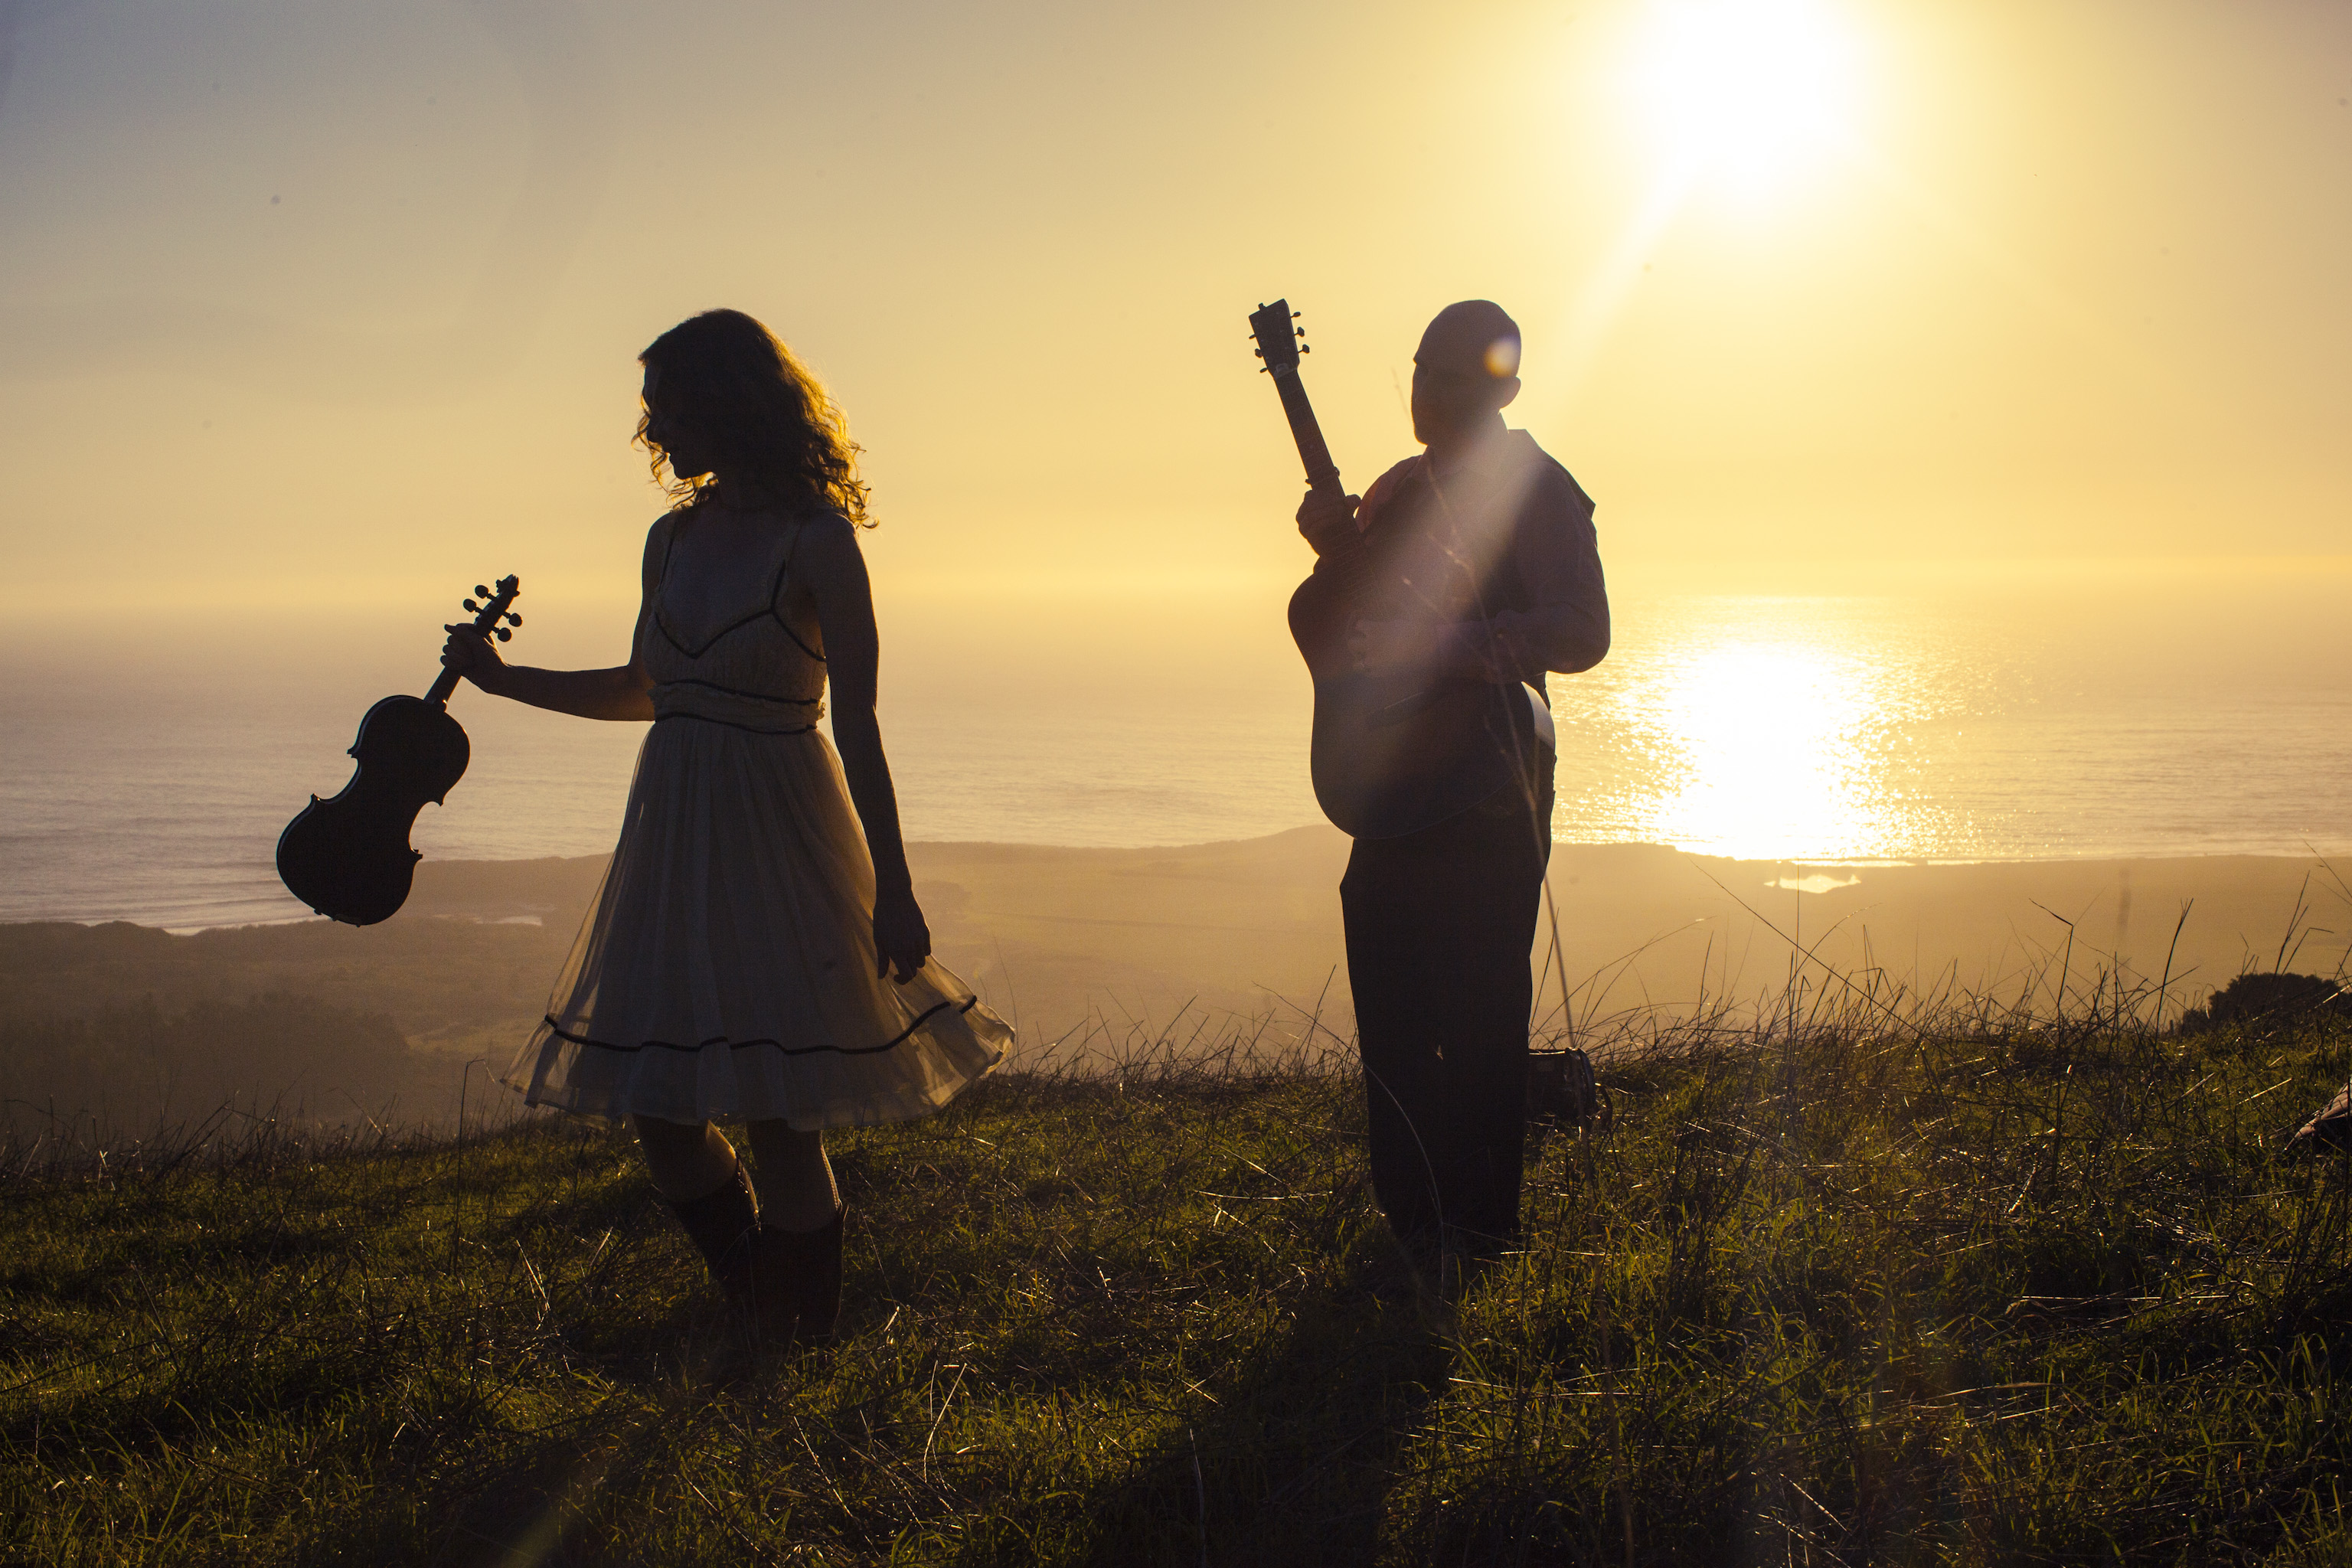 Dan Frechette & Laurel Thomsen dancing in the sunset light with their violin and guitar